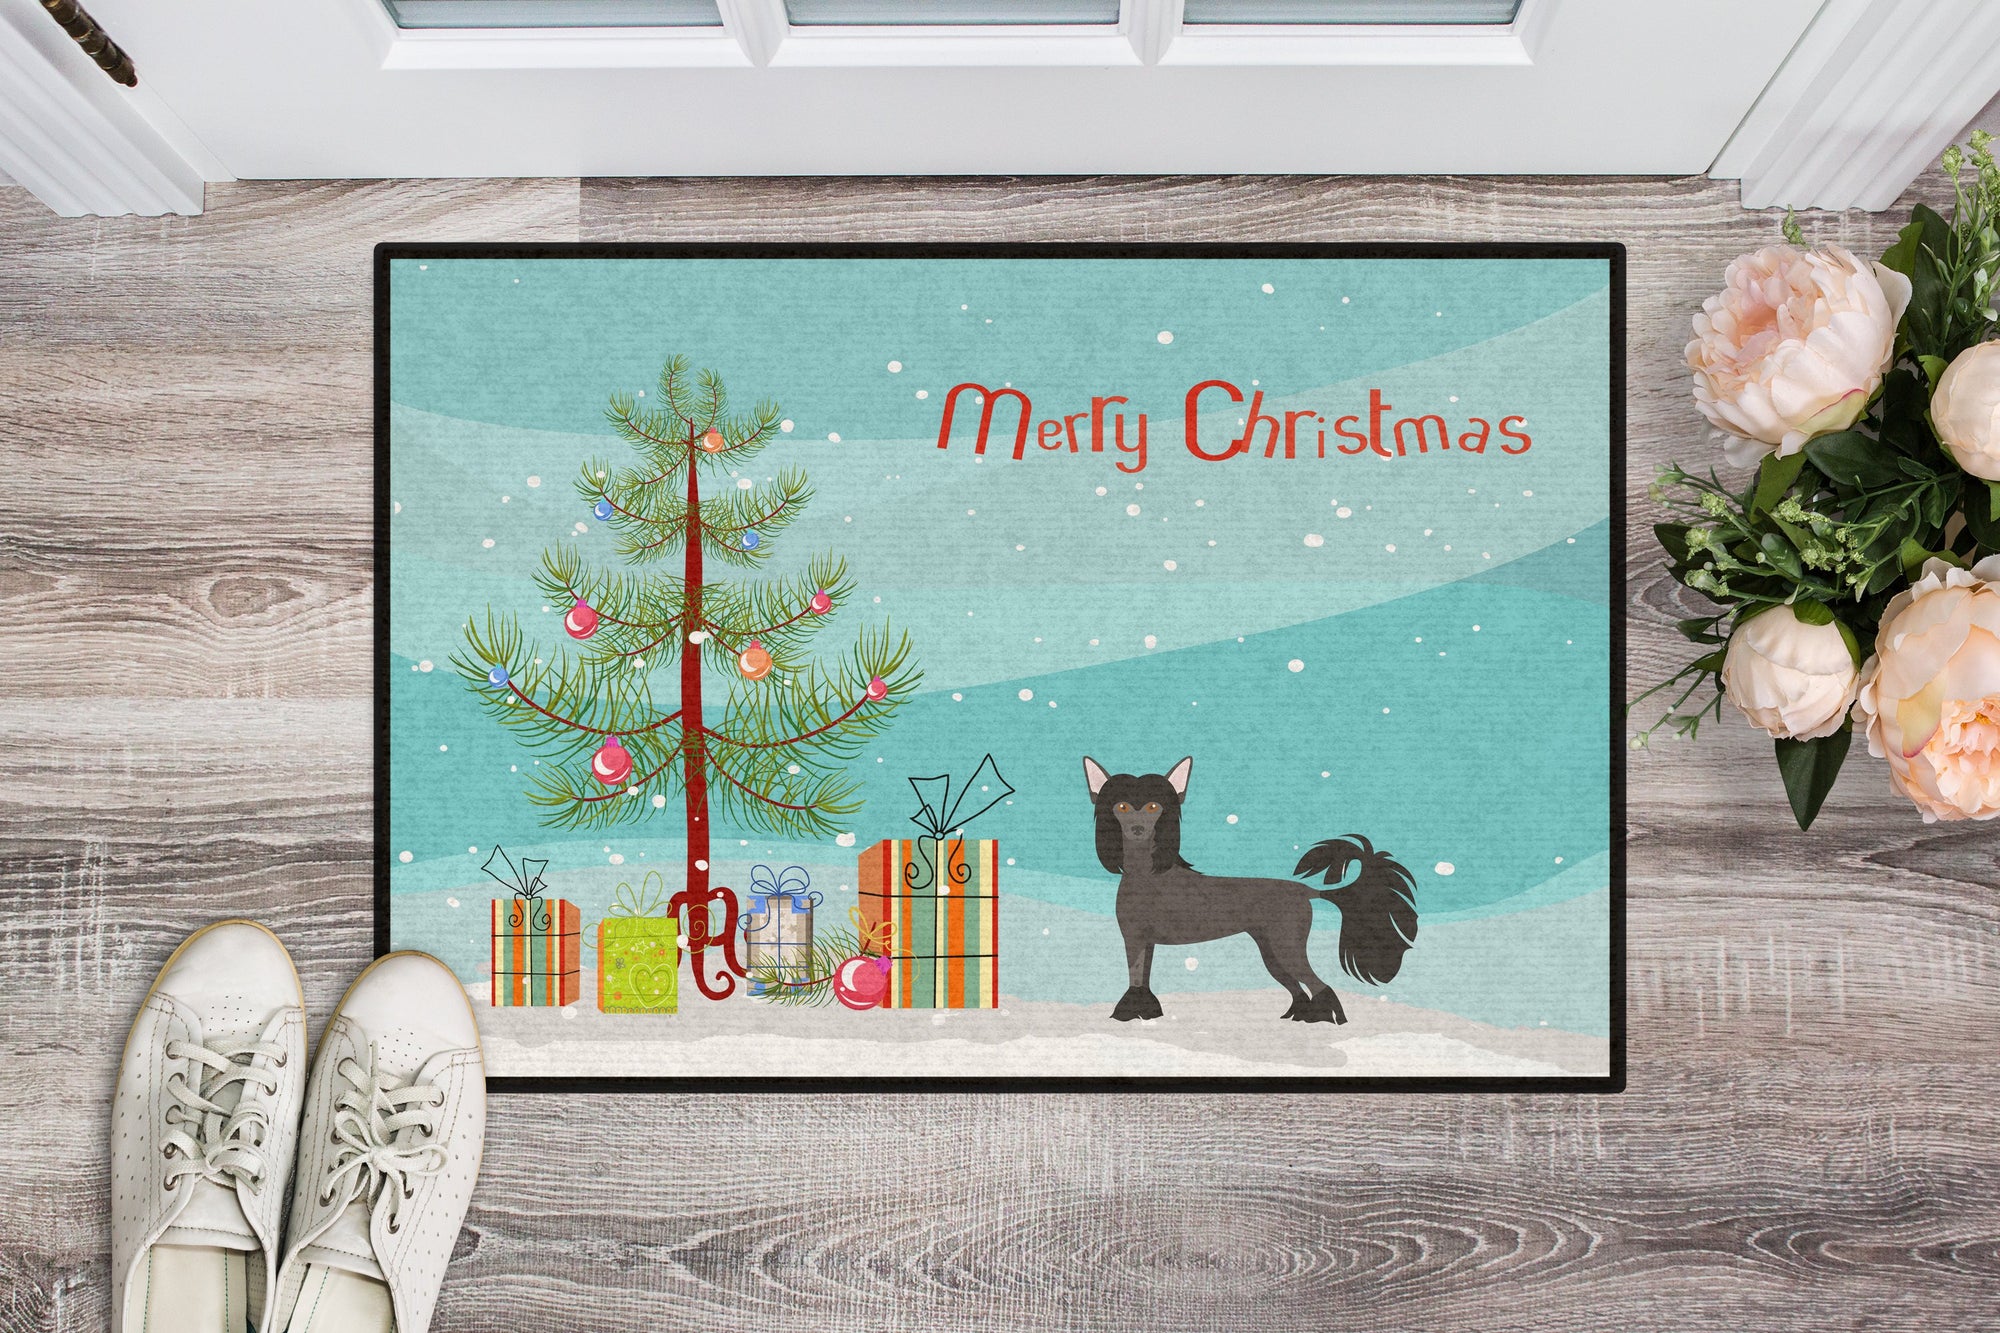 Chinese Crested Christmas Tree Indoor or Outdoor Mat 24x36 CK3447JMAT by Caroline's Treasures